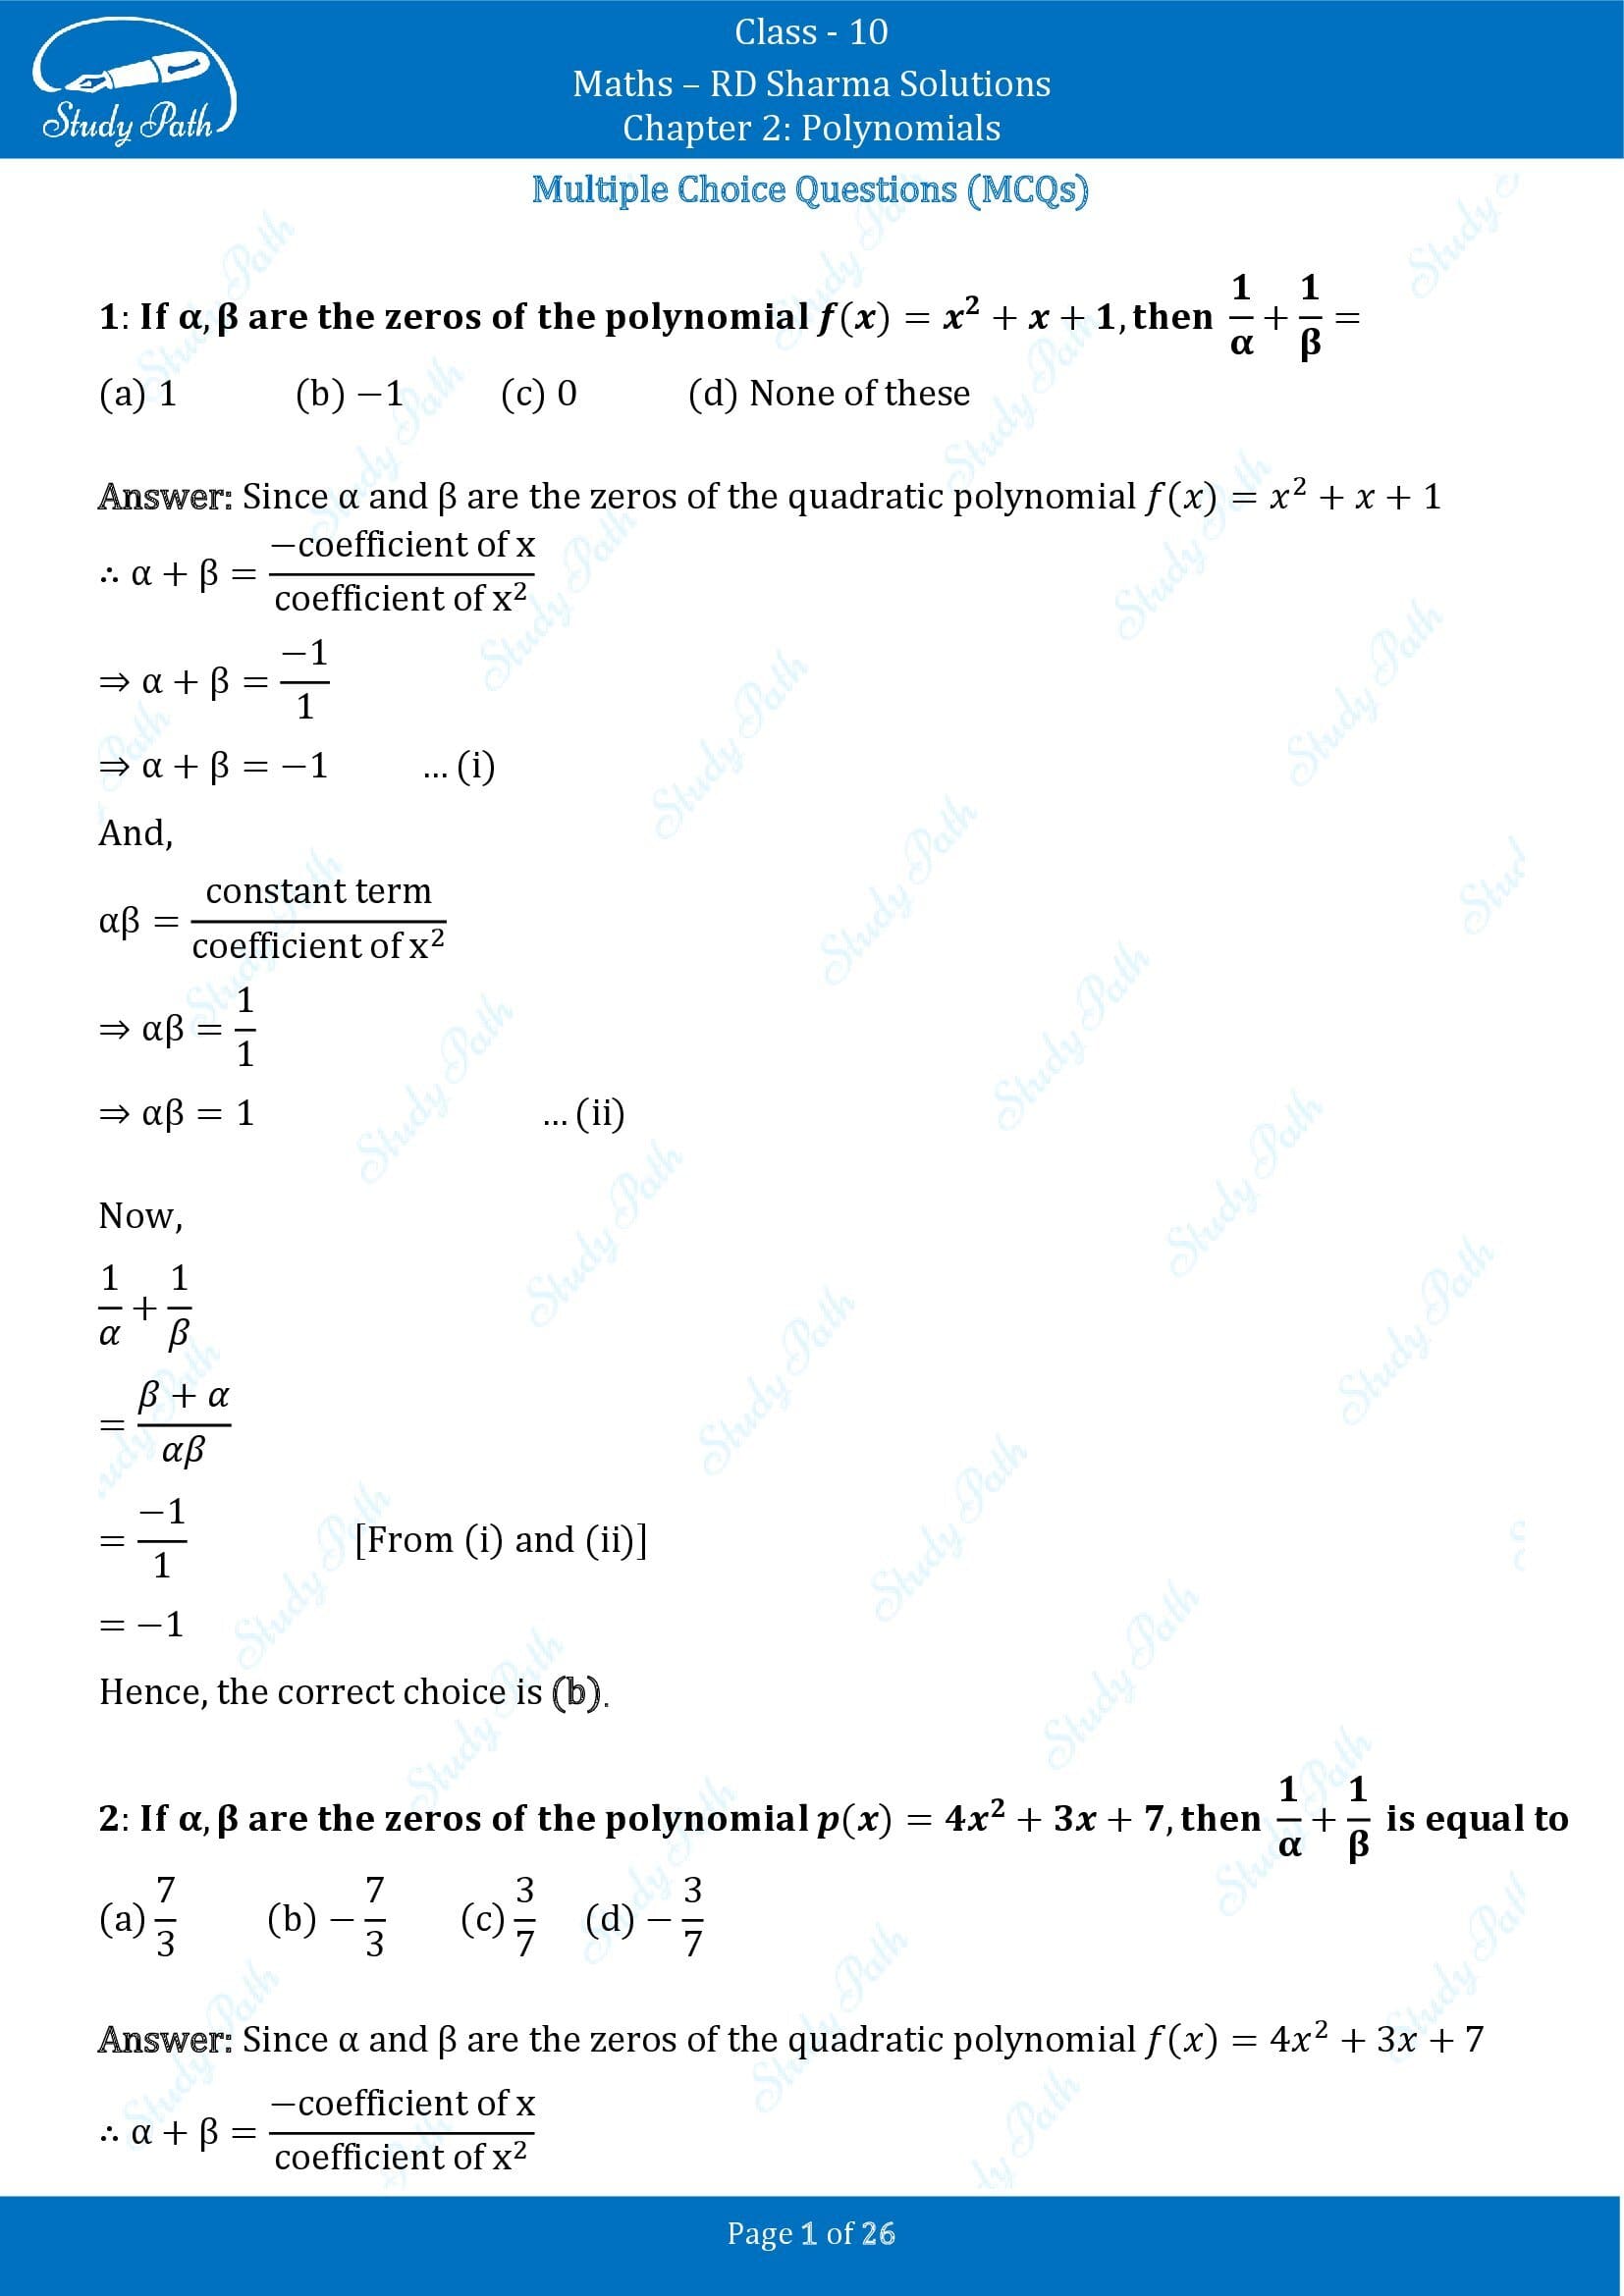 RD Sharma Solutions Class 10 Chapter 2 Polynomials Multiple Choice Questions MCQs 00001